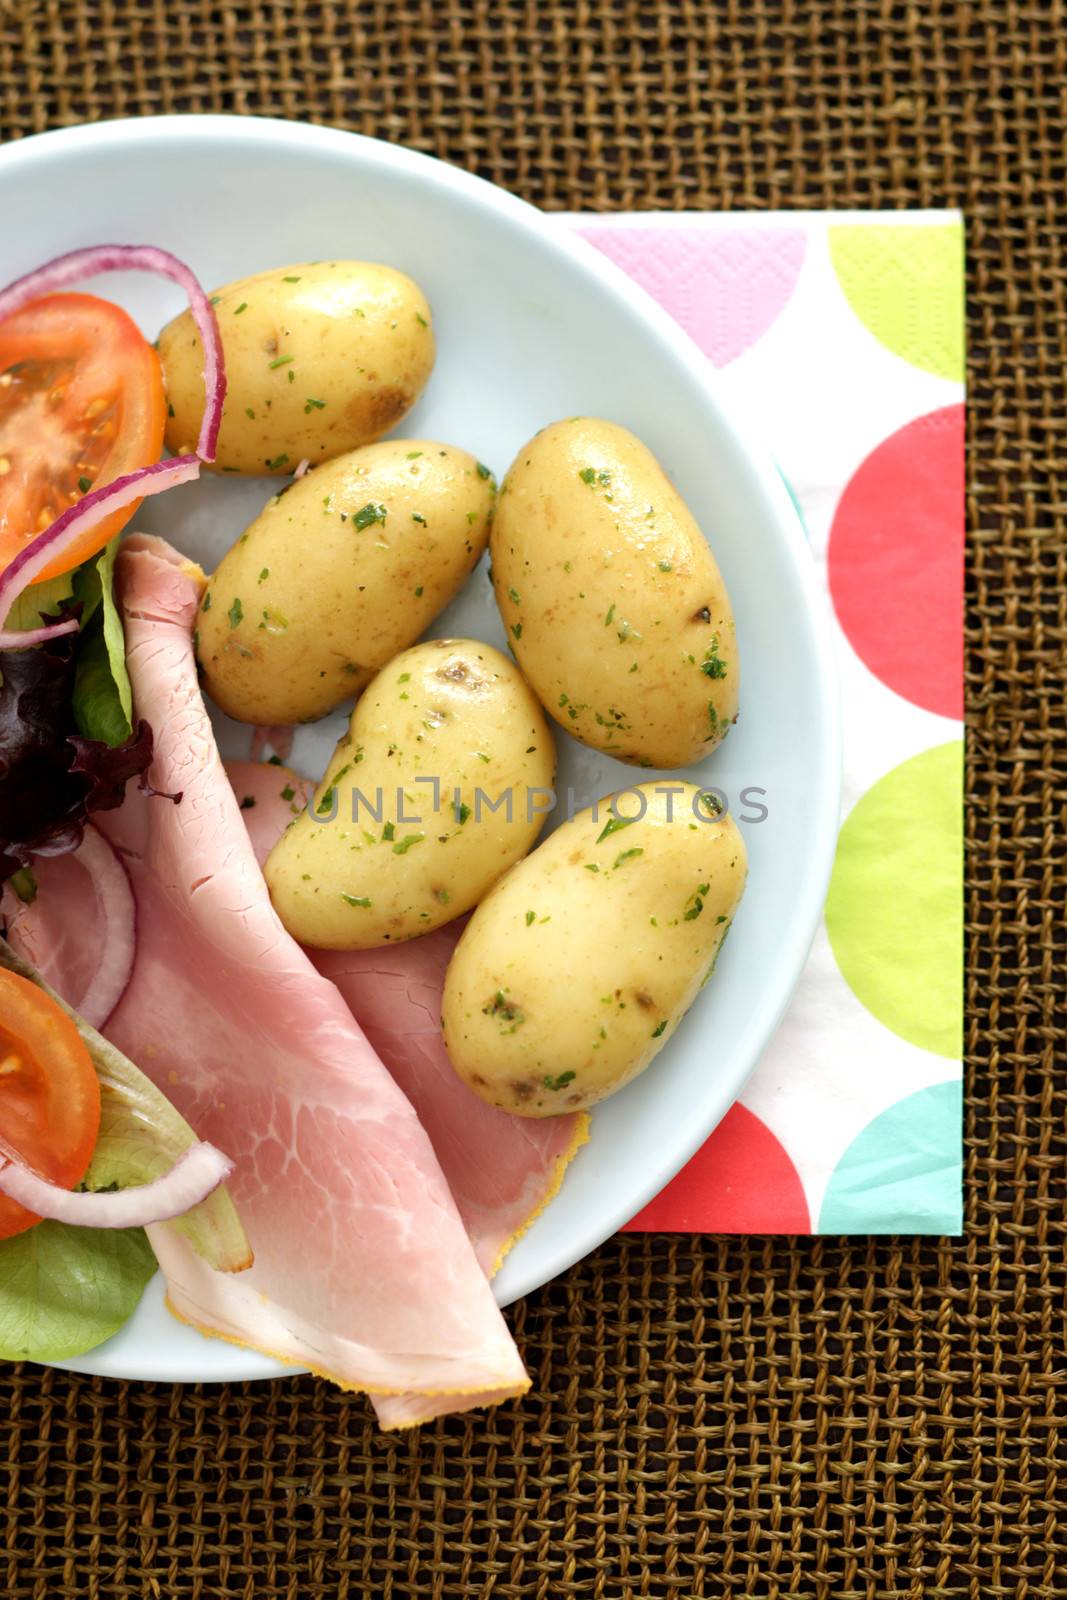 Ham Salad with New Boiled Potatoes by Whiteboxmedia